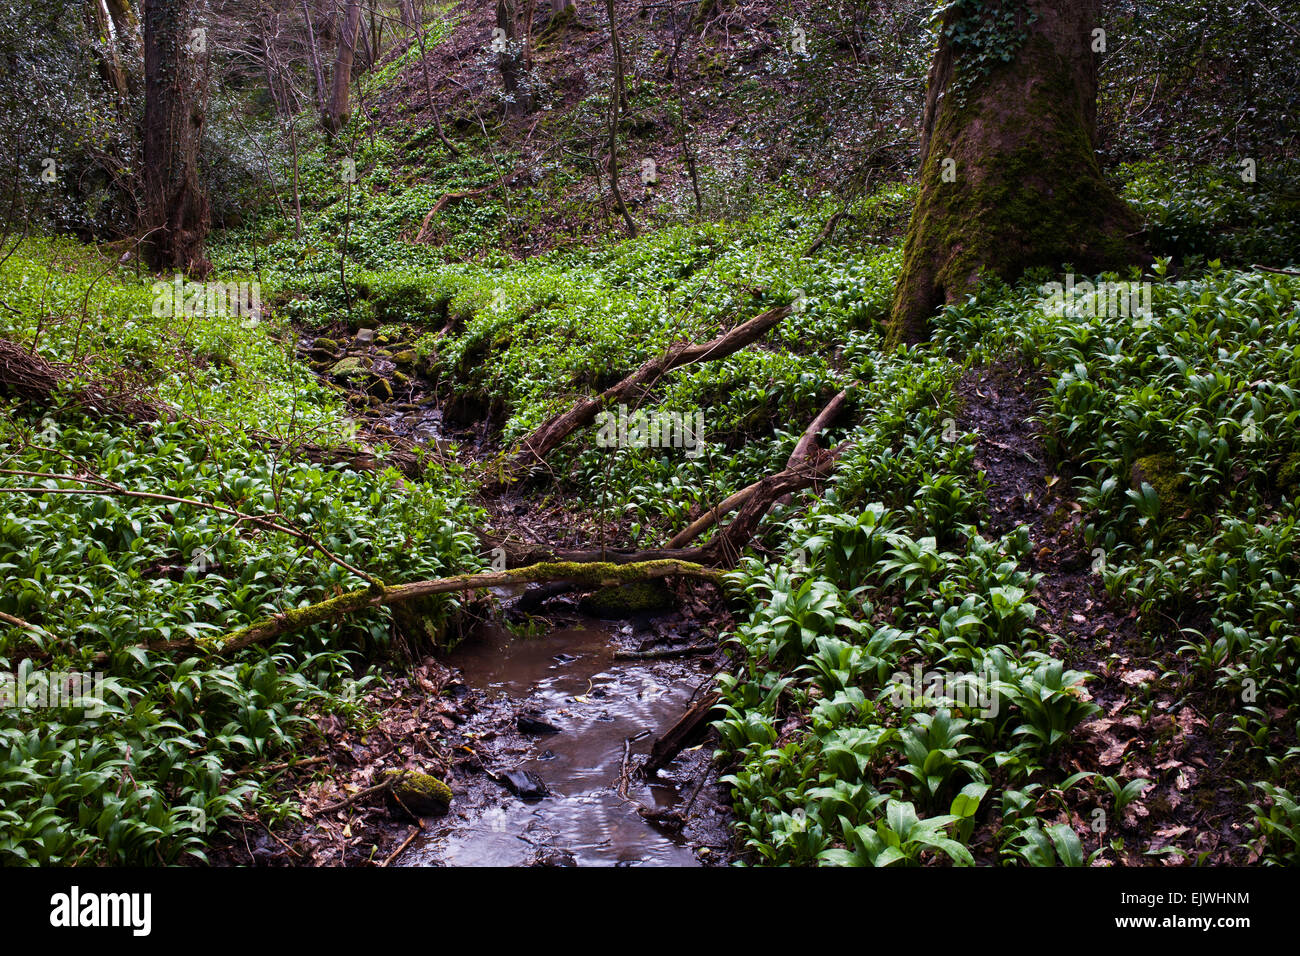 A stream running through native British forest with carpets of wild garlic on the banks. Stock Photo